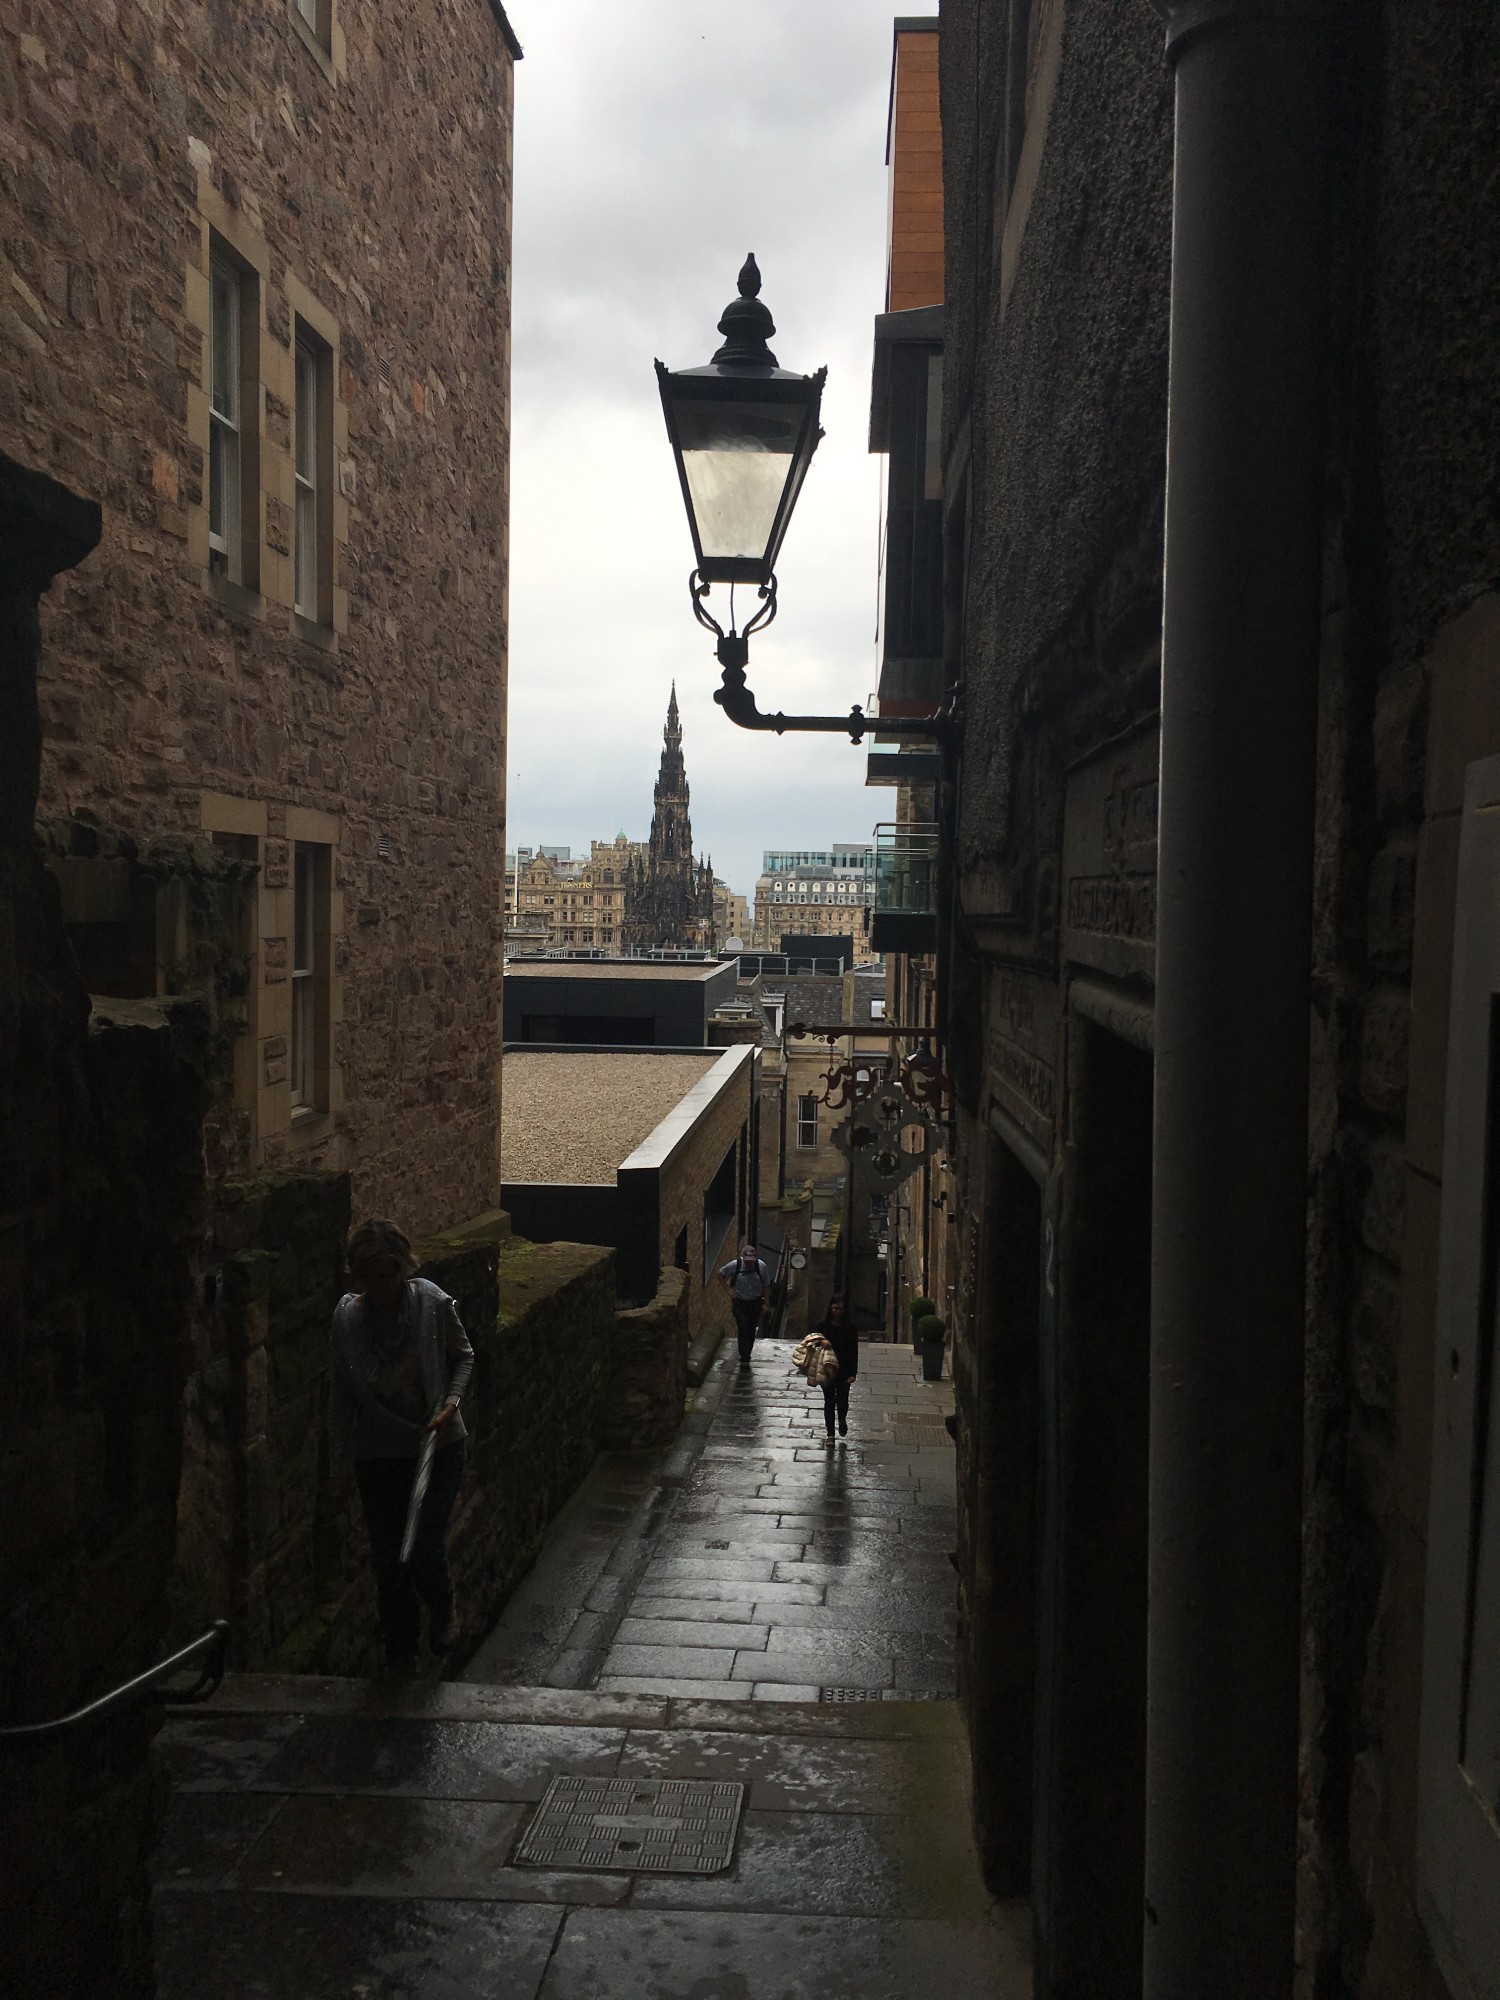 View of a narrow close with a lamp overhead - tips for planning a trip to Edinburgh, Scotland, from Wanderful